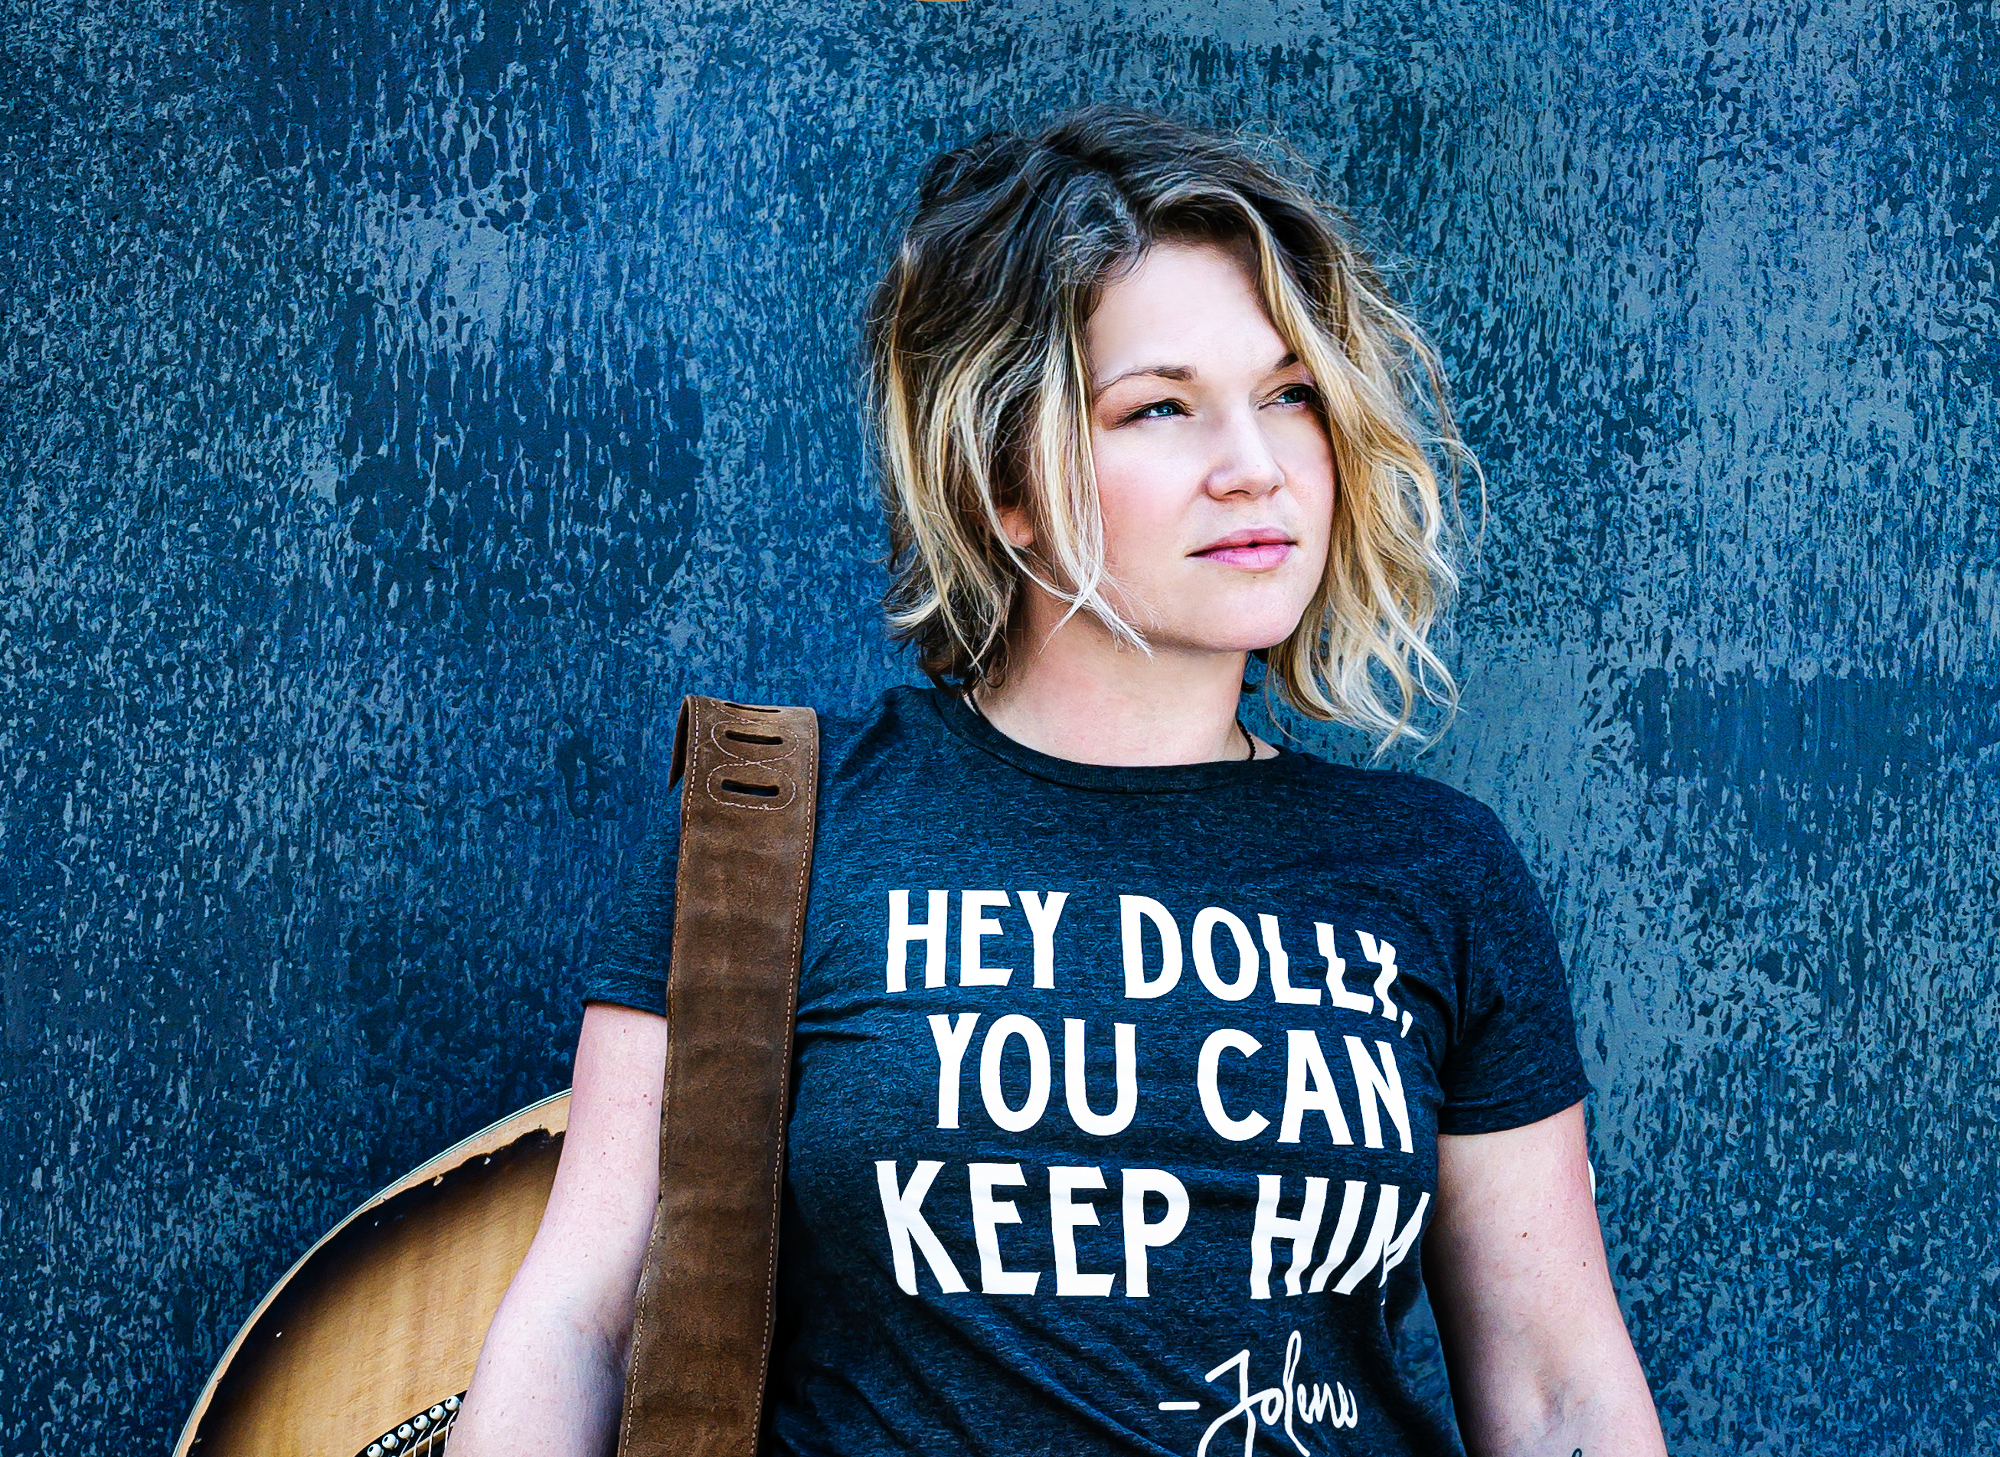 Crystal Bowersox Preaches Love and Unity with New Single “Courage To Be Kind”